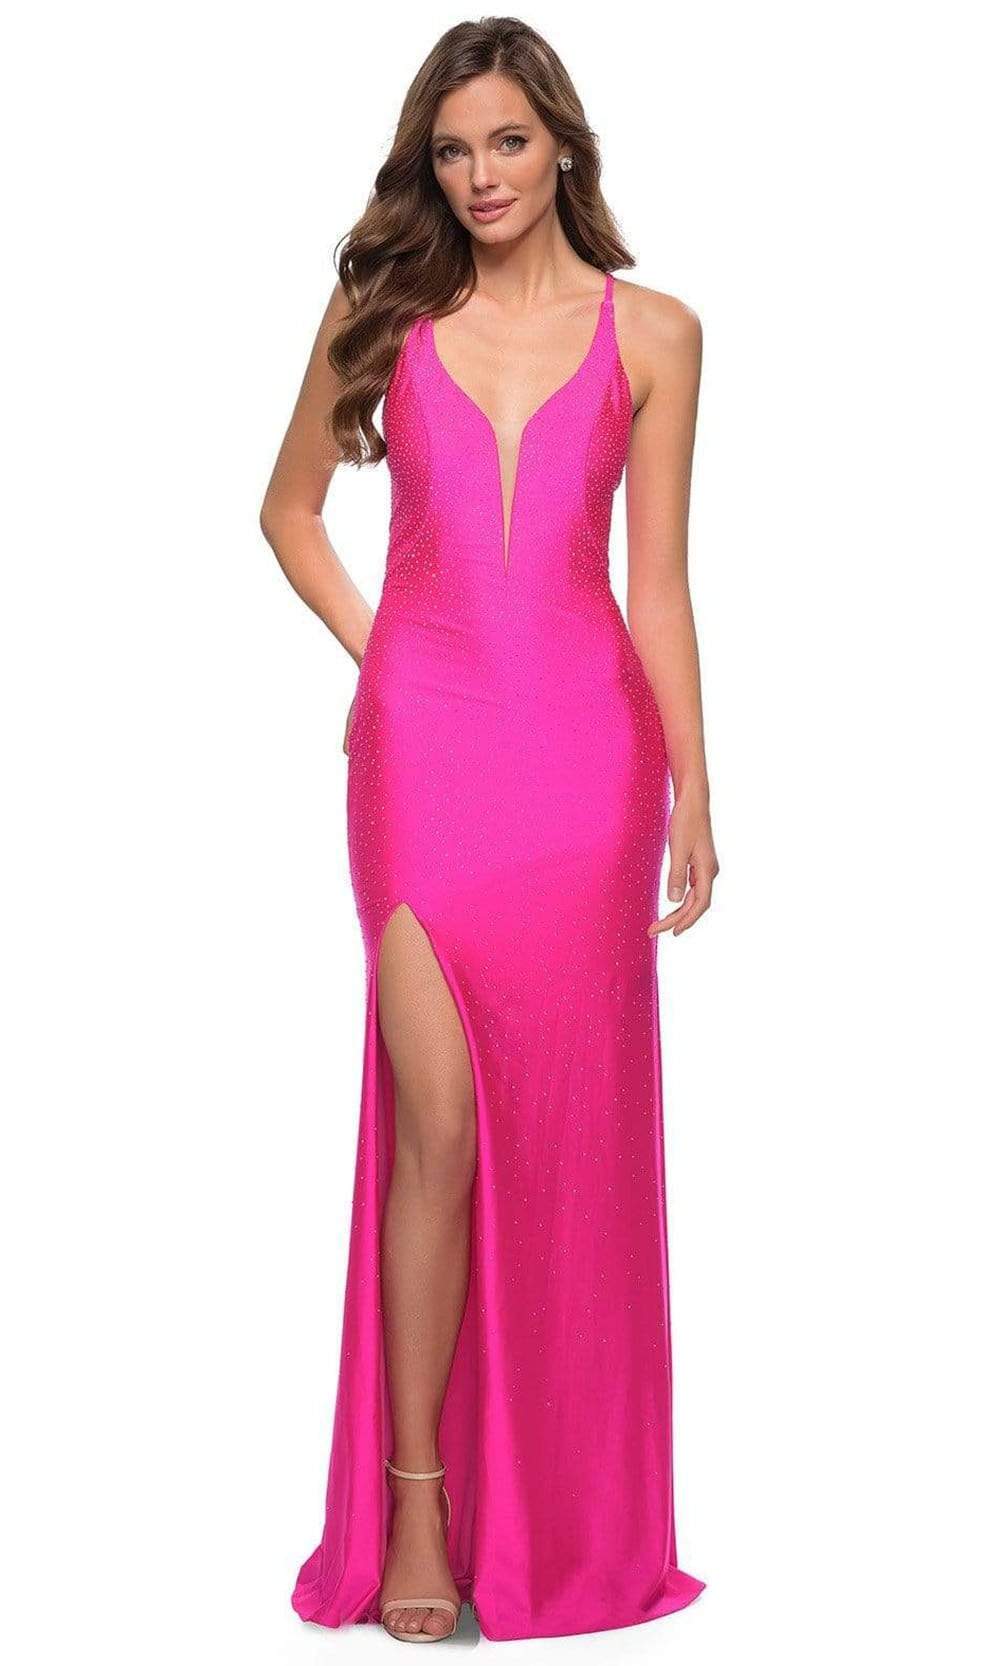 La Femme - 29969 Low V Neck Beaded Long Gown Prom Dresses 00 / Neon Pink